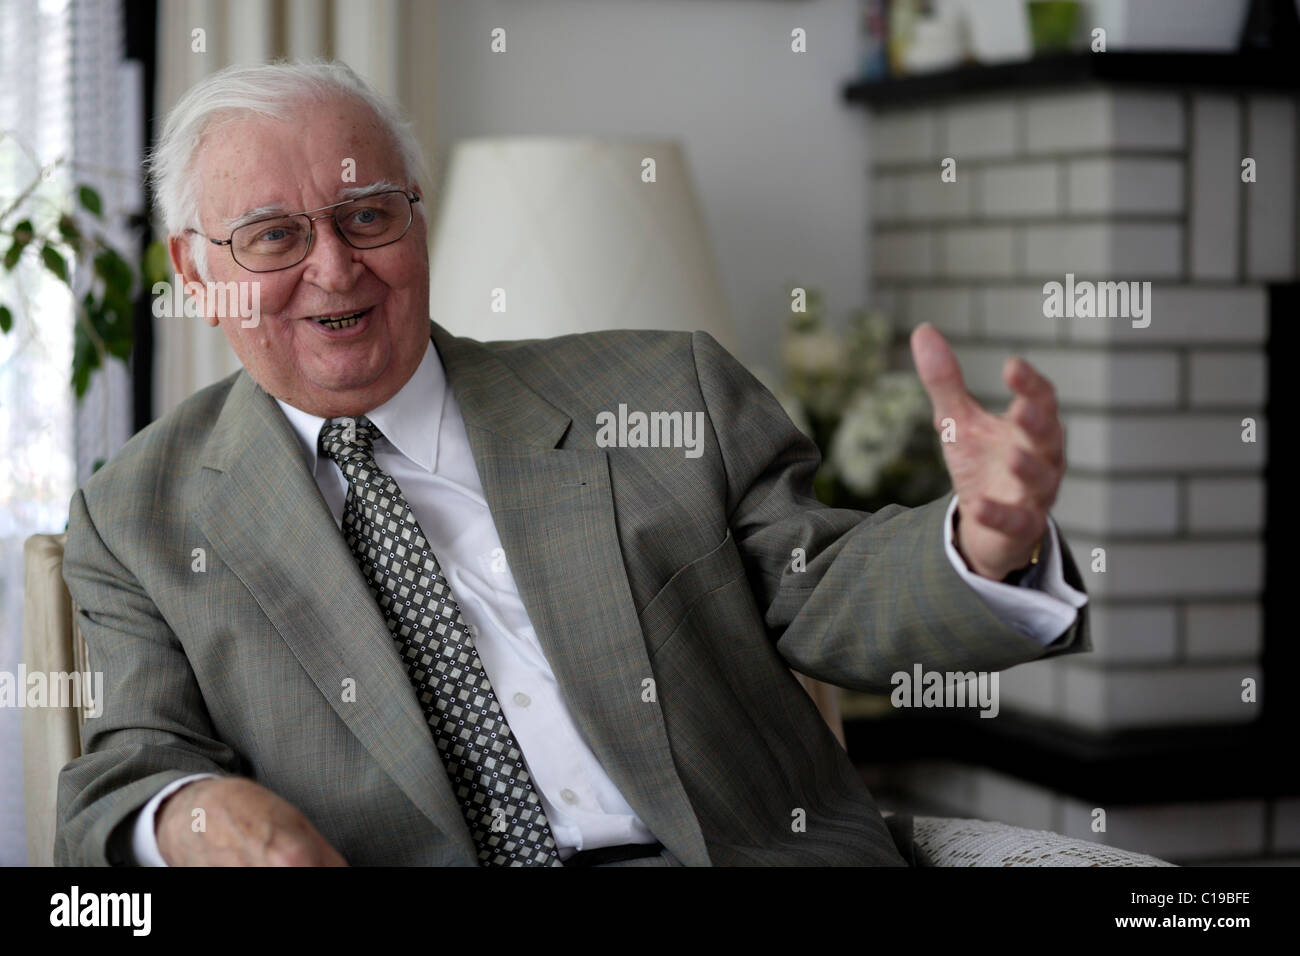 Dr. Egon Alfred Klepsch, former member of German and European parliament, former president of the European parliament Stock Photo